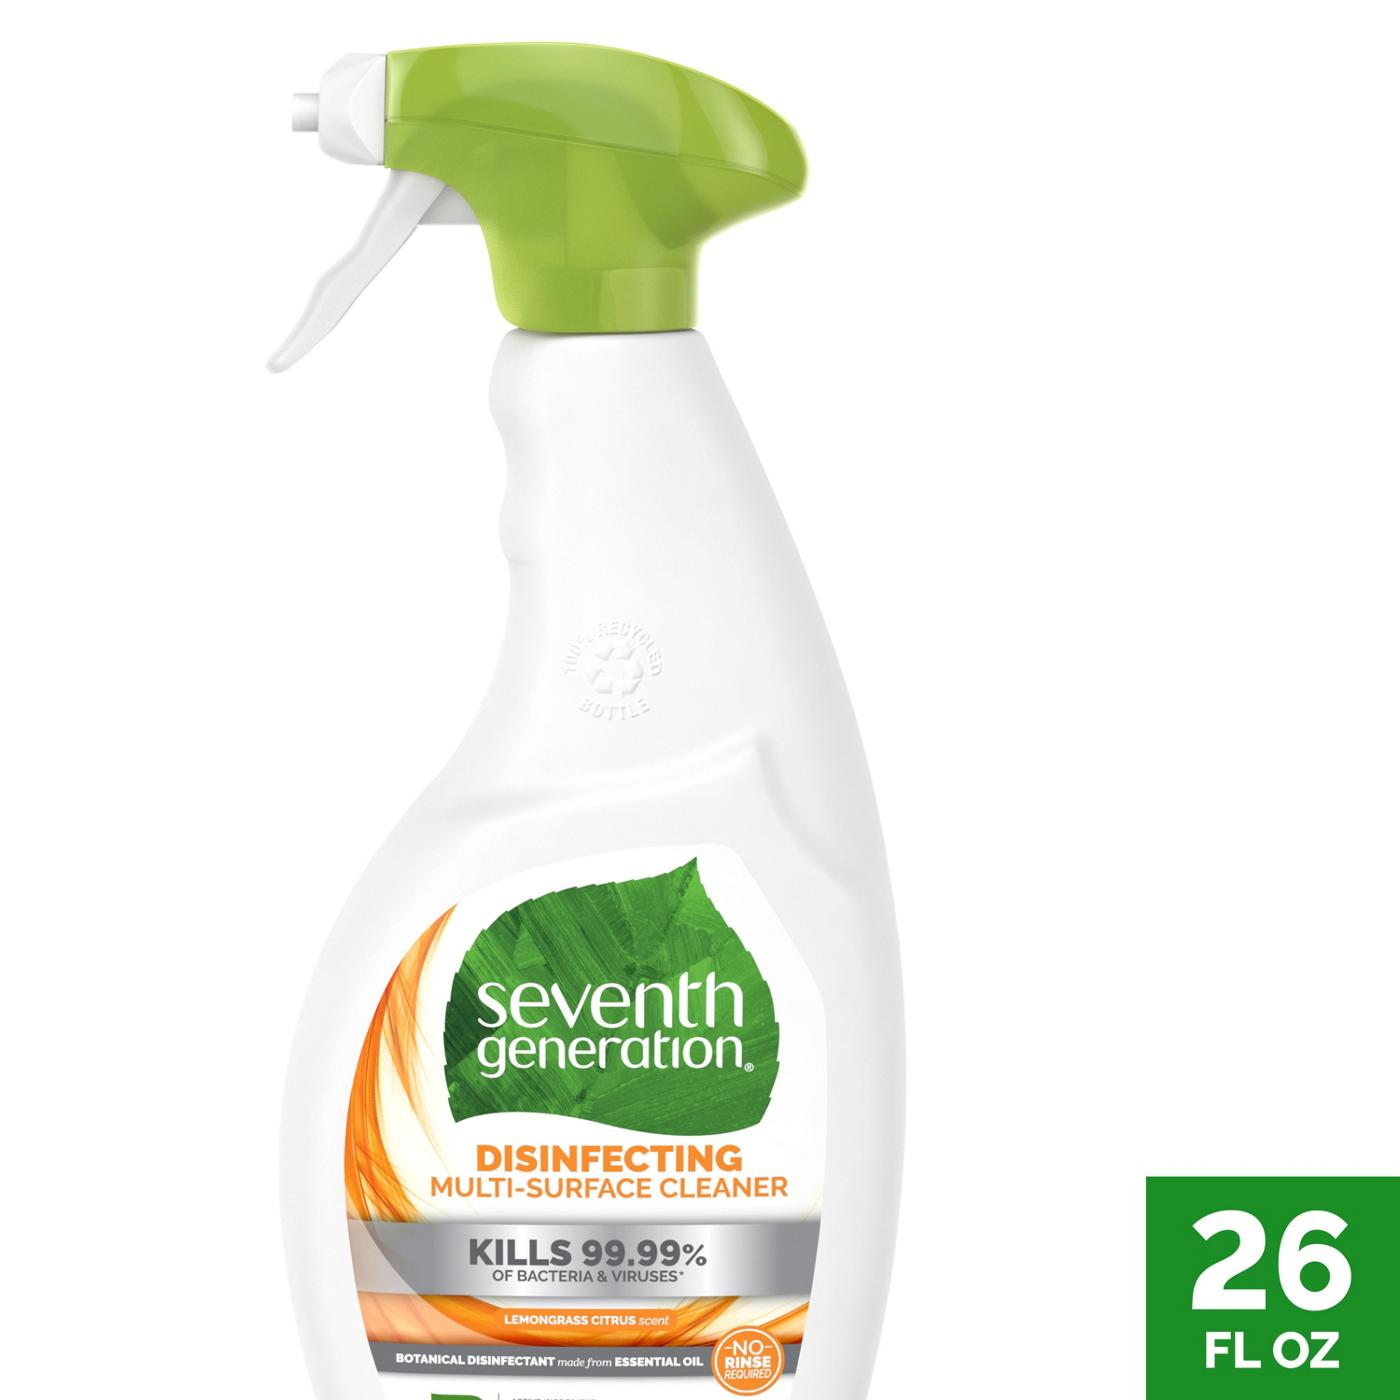 Seventh Generation Disinfecting Multi-Surface Cleaner; image 8 of 9